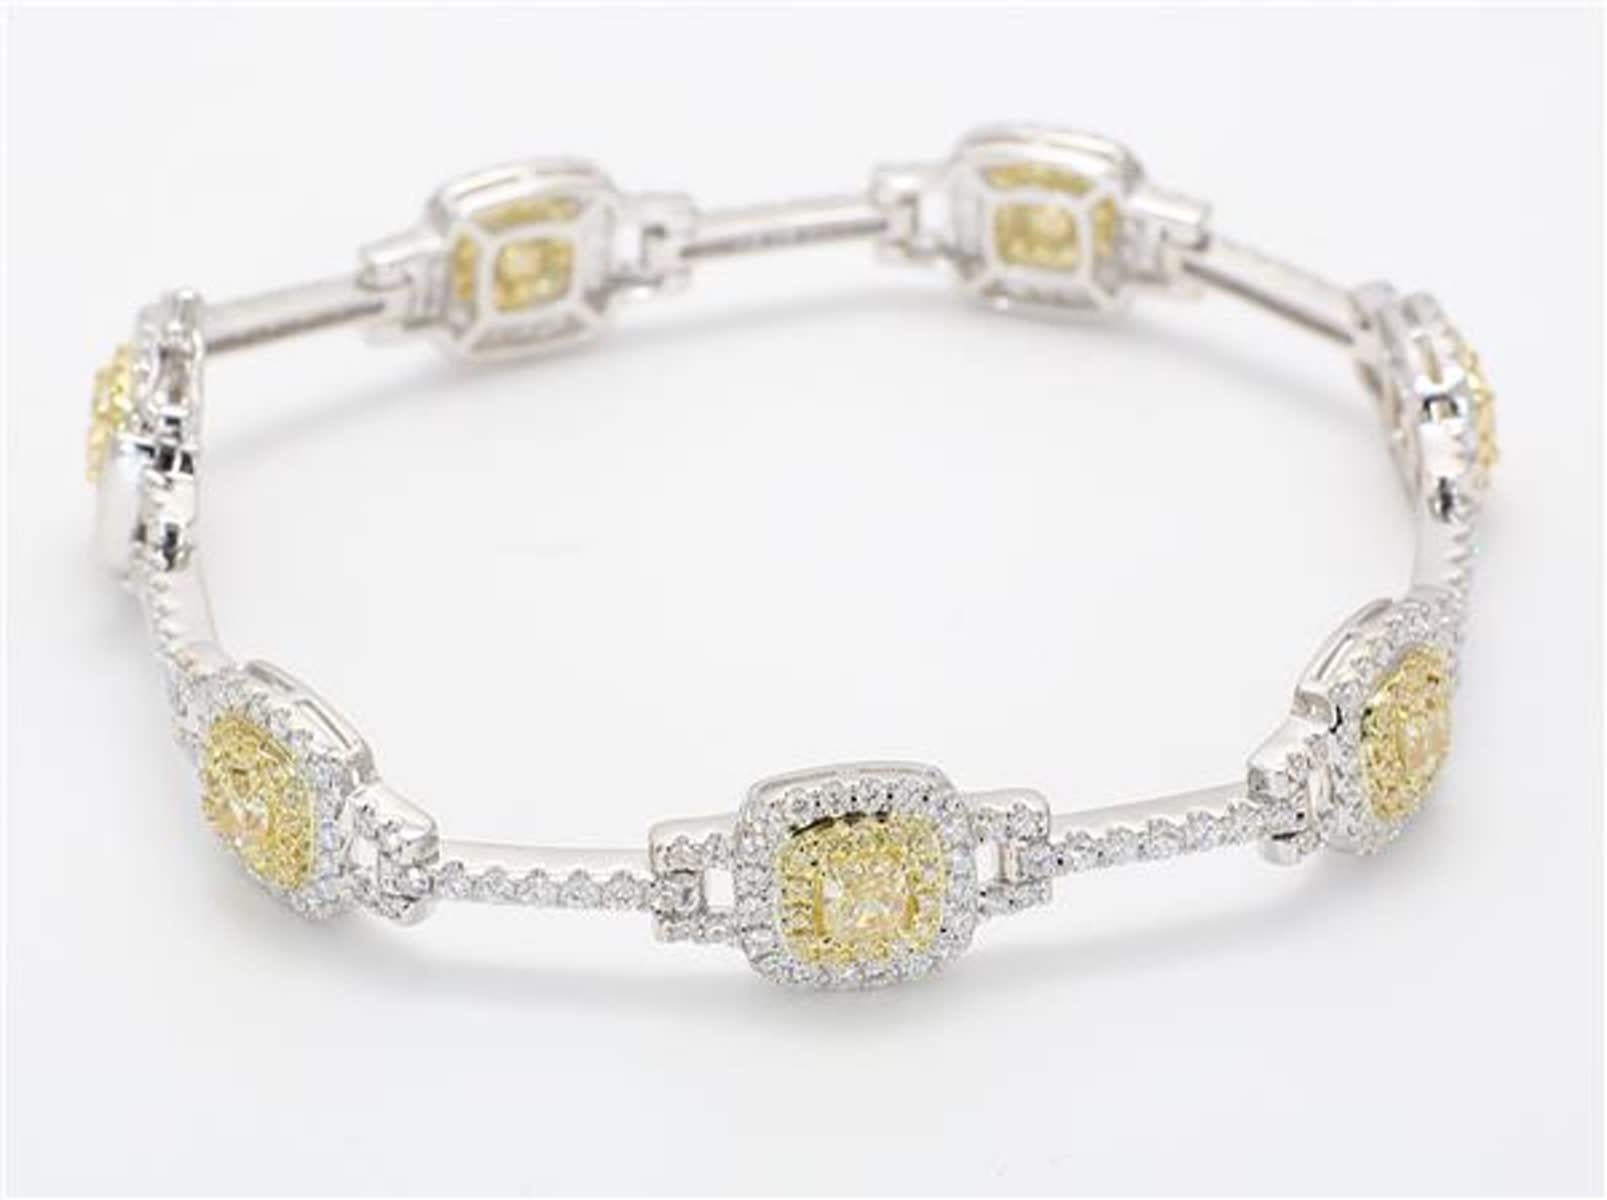 RareGemWorld's classic natural radiant cut yellow diamond bracelet. Mounted in a beautiful 18K Yellow and White Gold setting with 7 natural radiant cut yellow diamonds. The yellow diamonds are surrounded by small round natural white diamond and